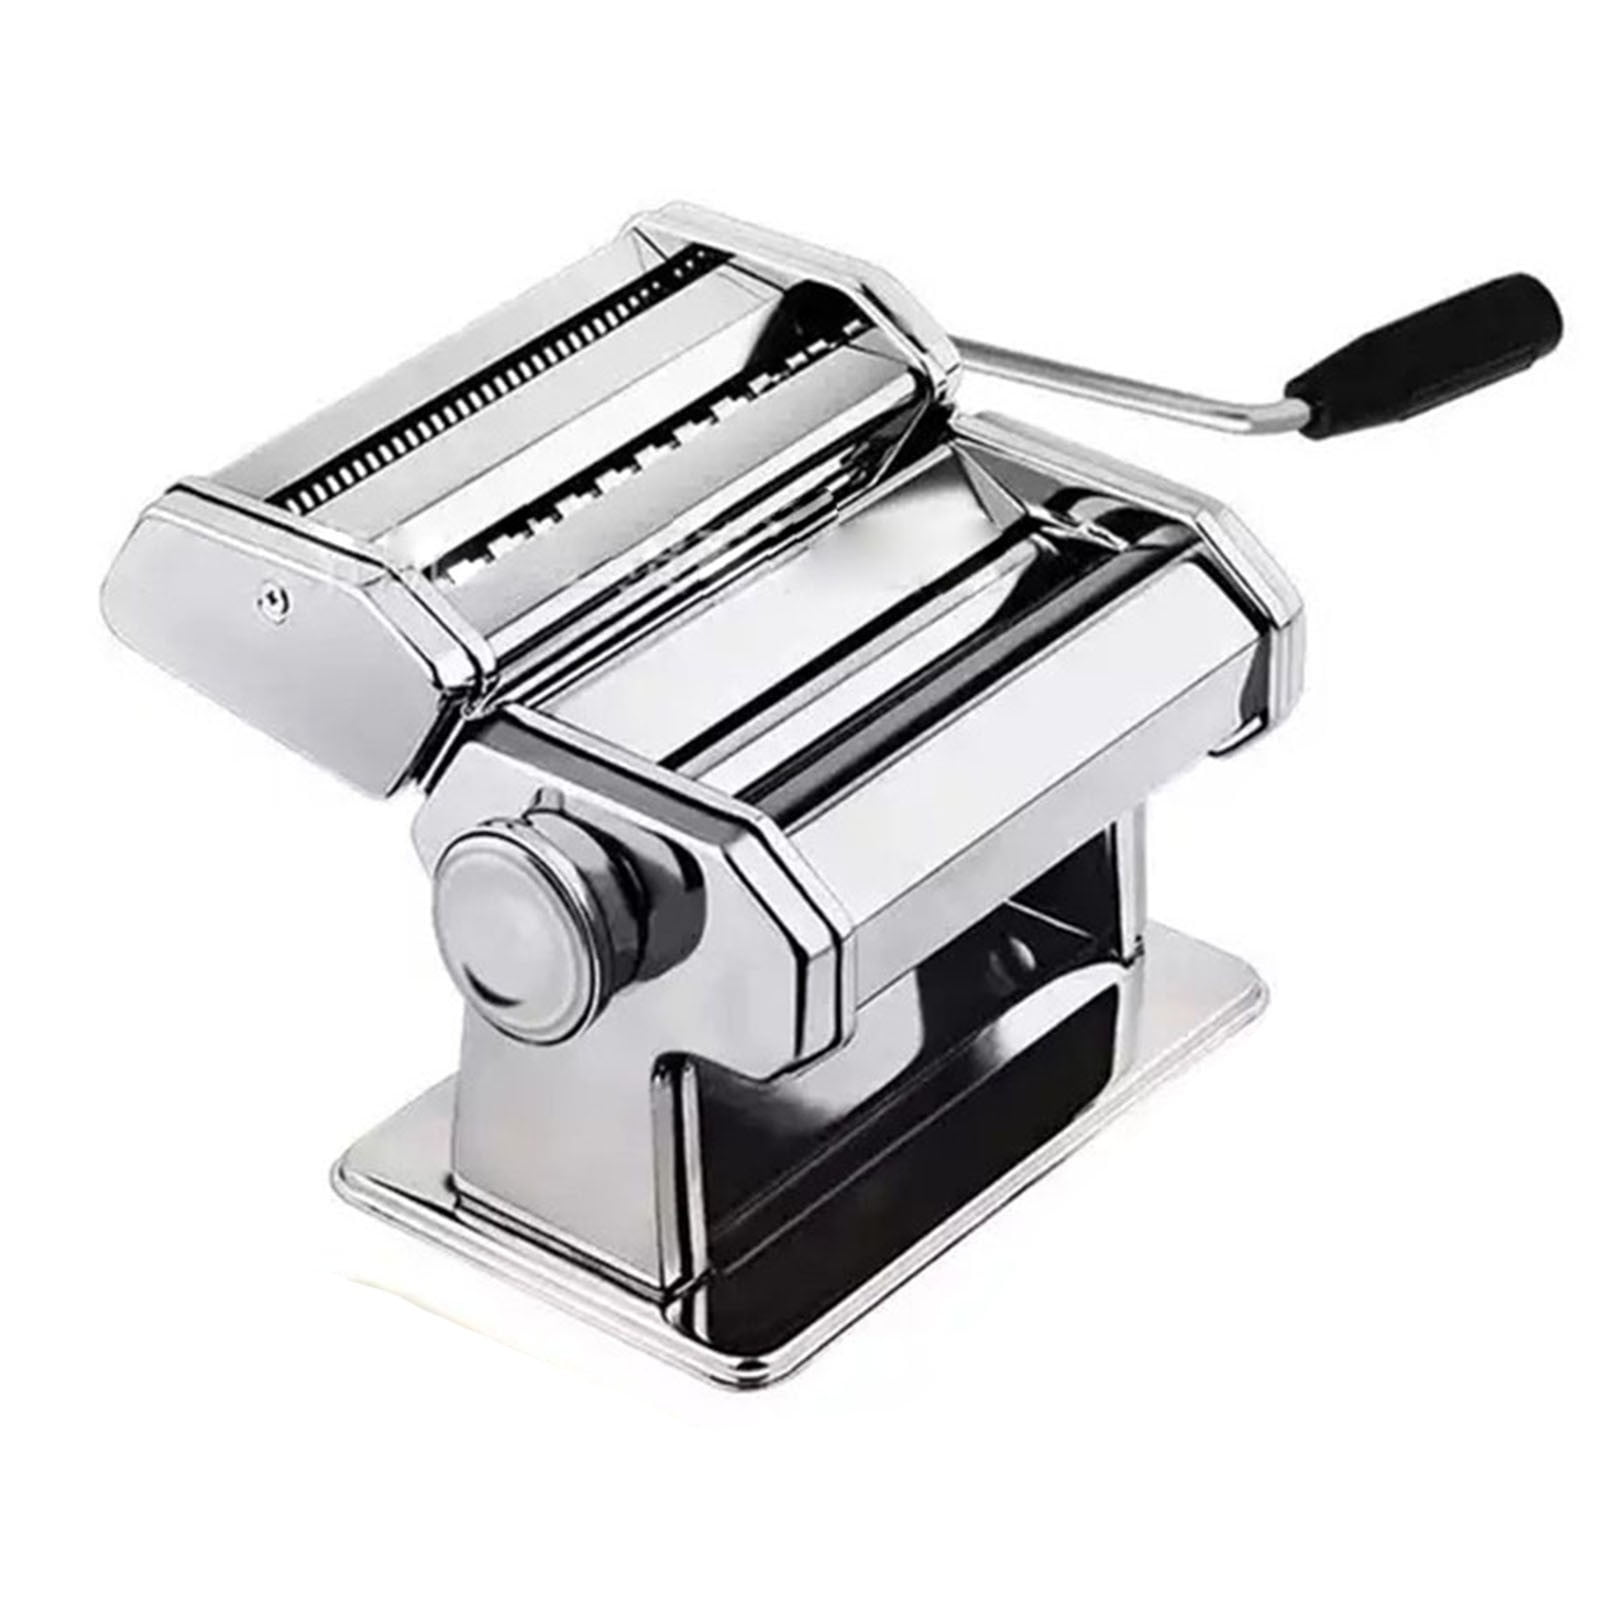 Pasta Maker - Washable Stainless Steel Noodle Maker with 7 Adjustable  Thickness Settings - Manual Hand Crank Pasta Machine - Perfect for Homemade  Spaghetti and Fettuccini, Linguine, Trenette 